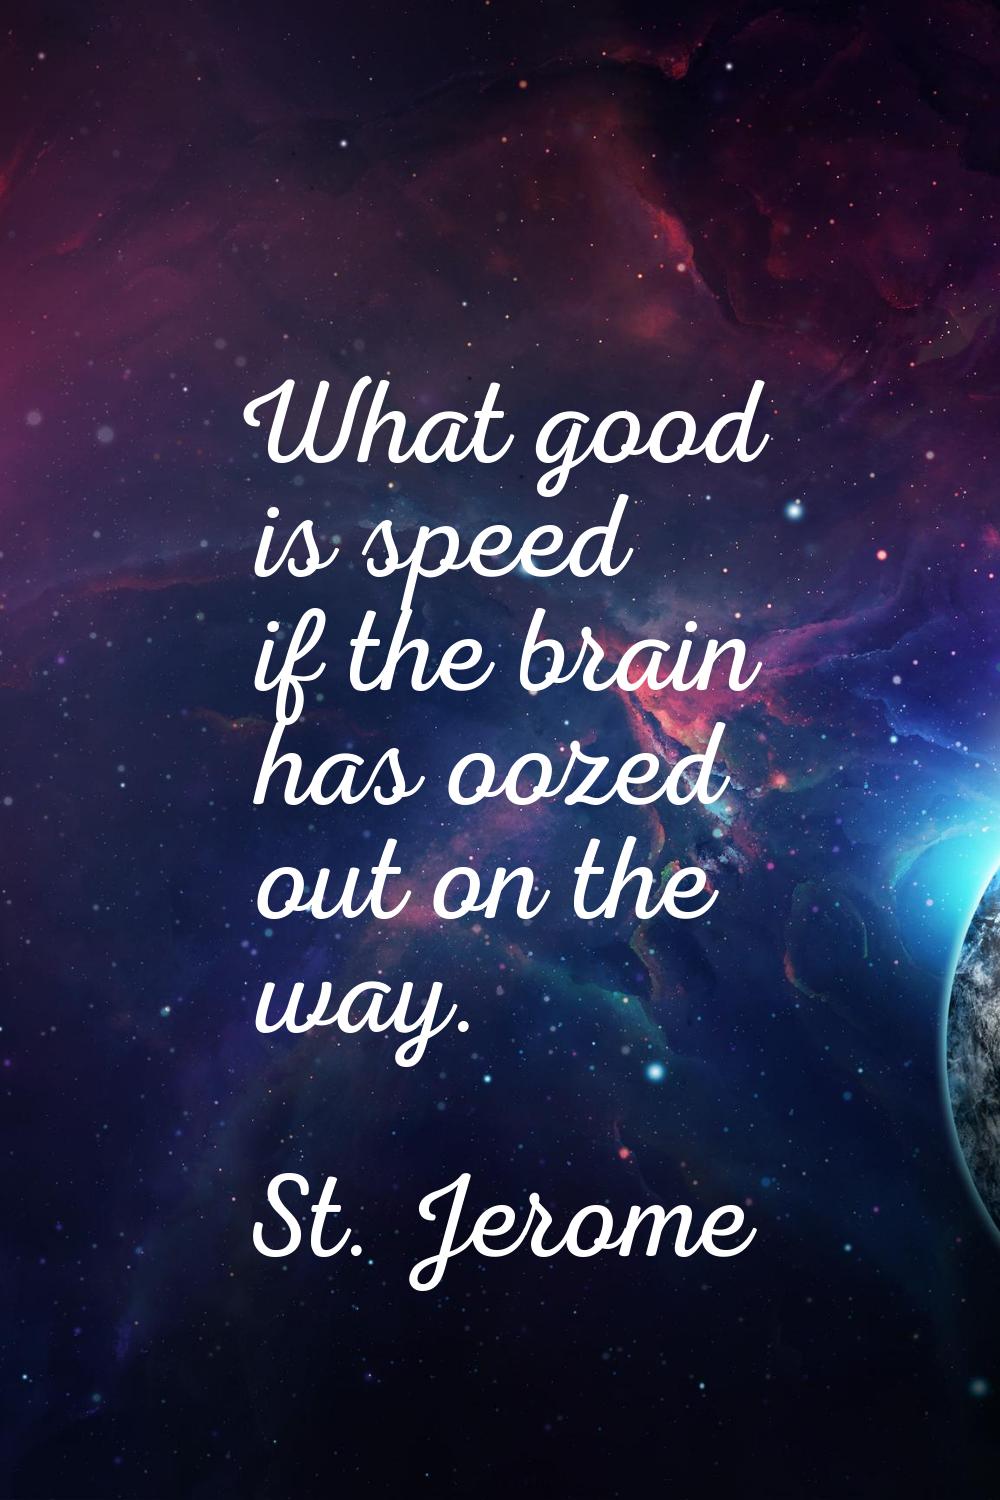 What good is speed if the brain has oozed out on the way.